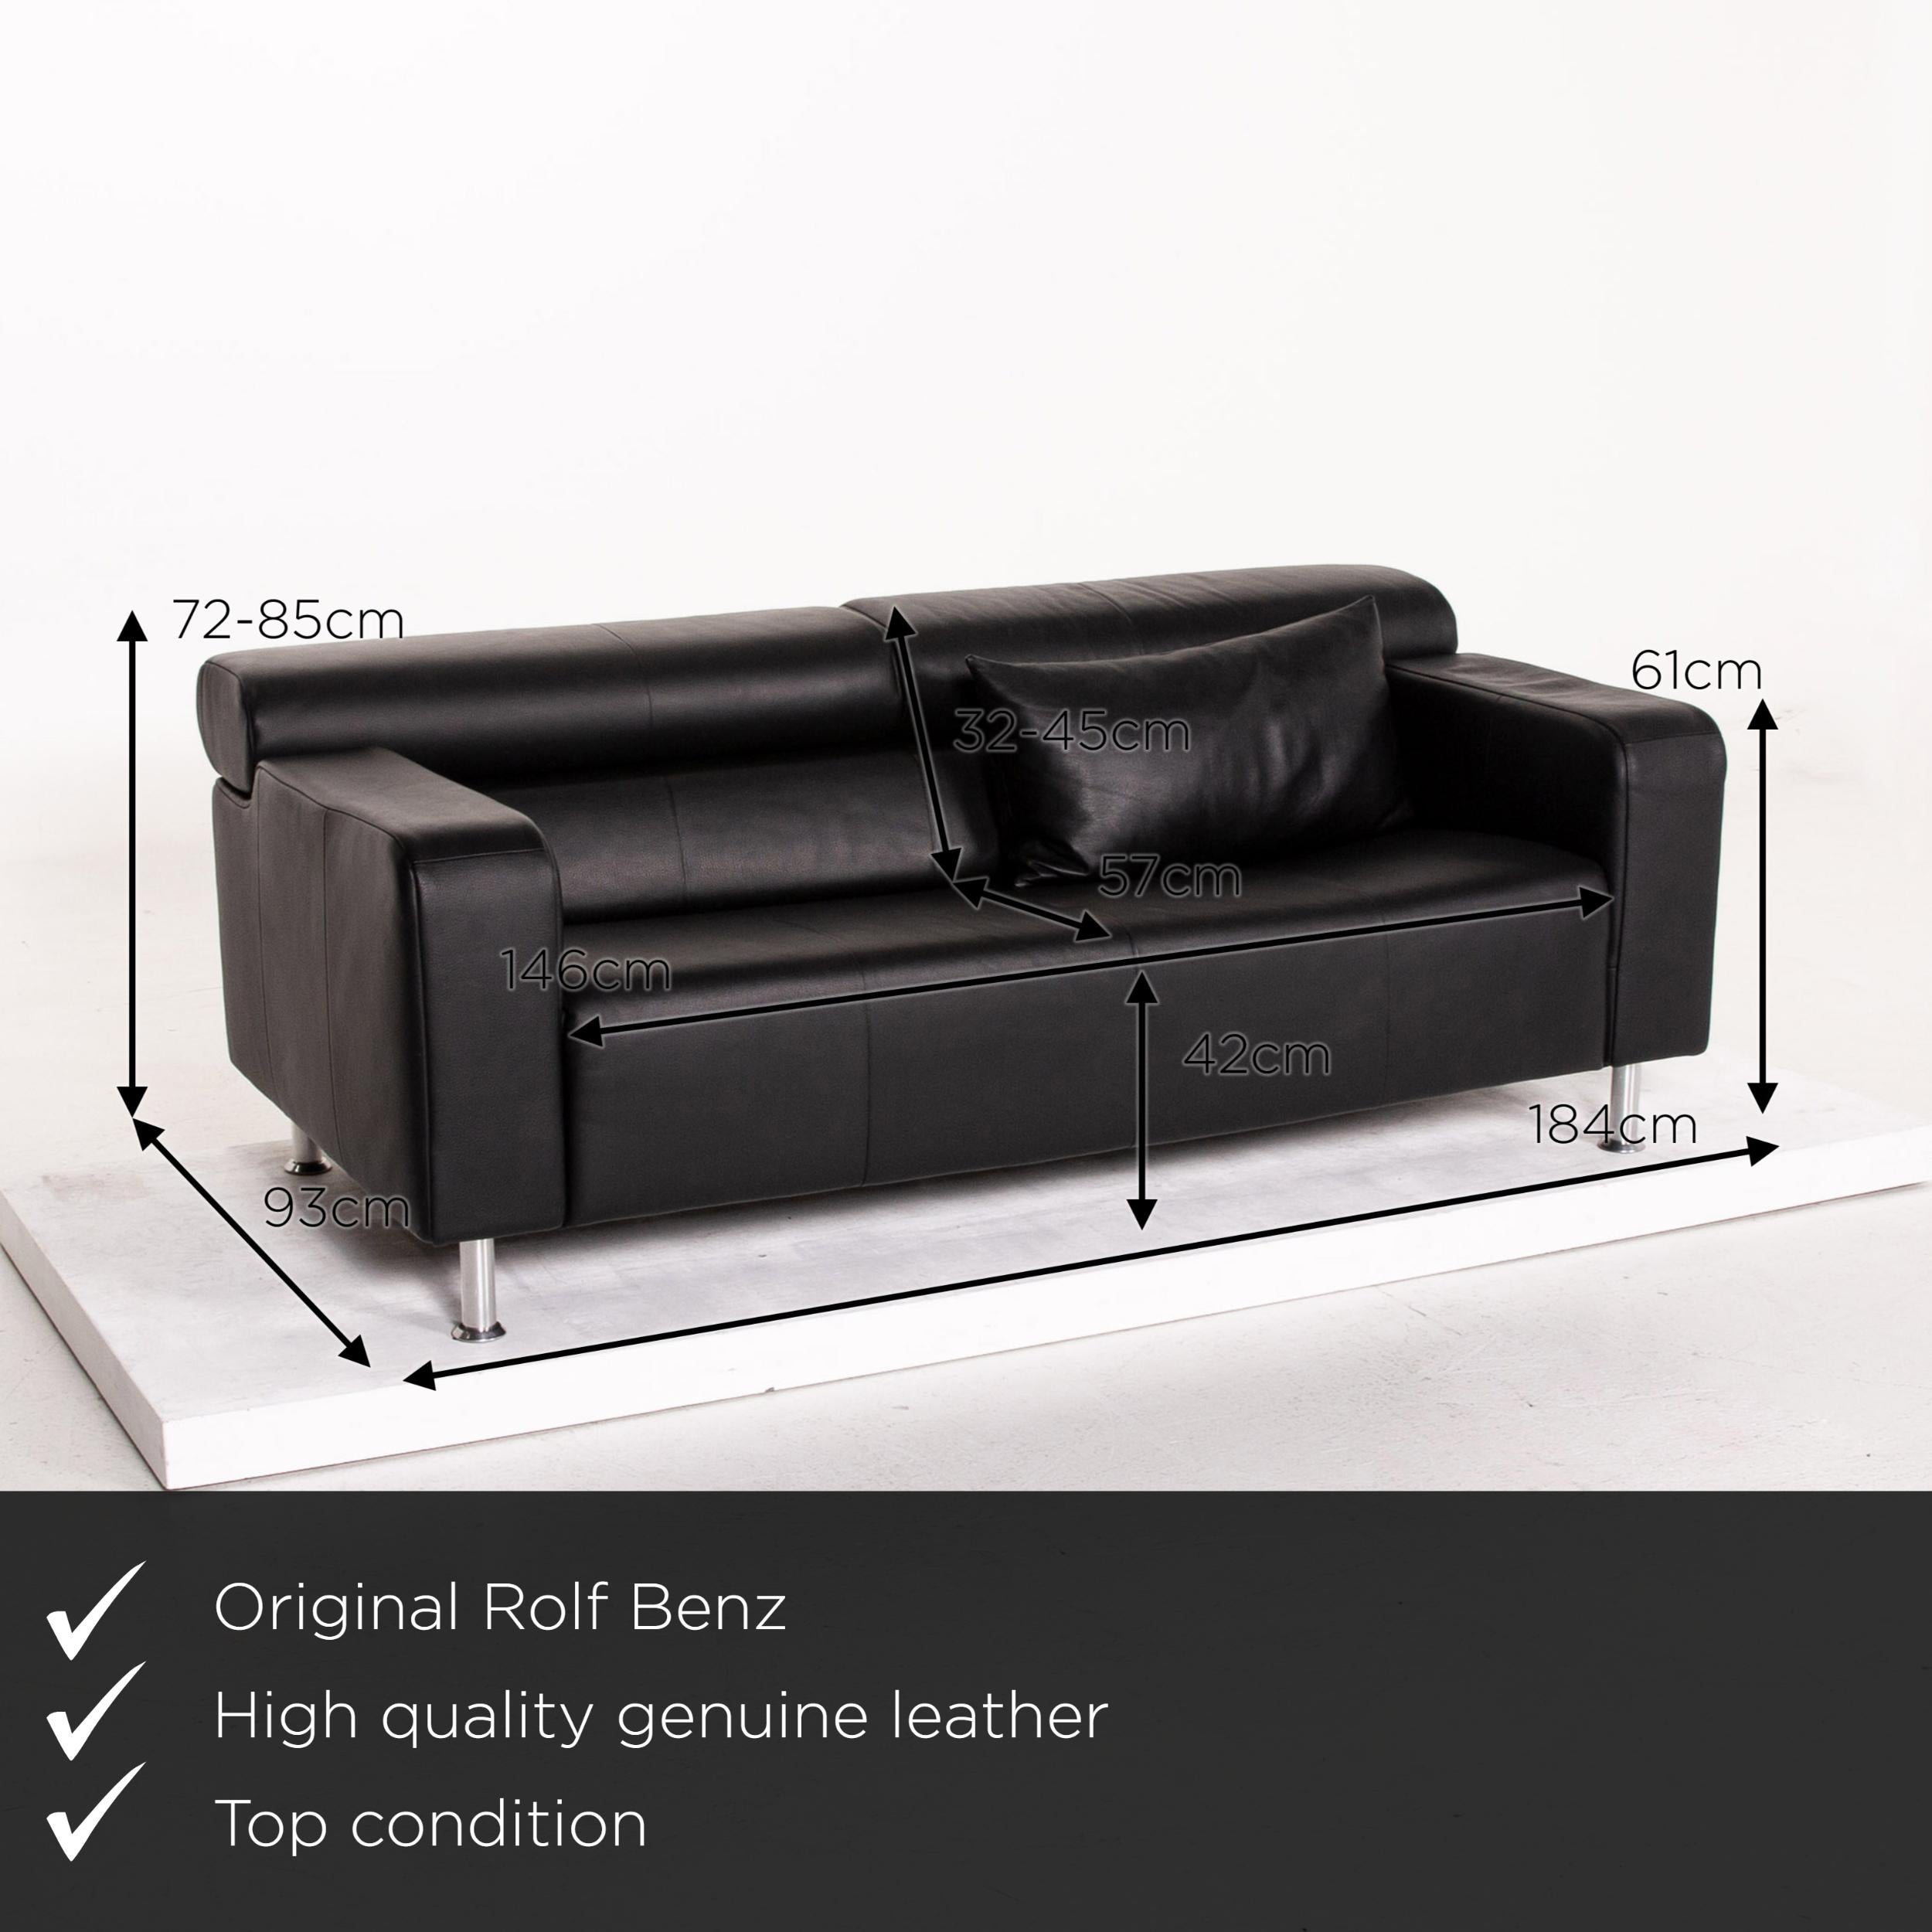 We present to you a Rolf Benz AK 422 leather sofa black three-seat couch.
 

 Product measurements in centimeters:
 

Depth 93
Width 184
Height 72
Seat height 42
Rest height 61
Seat depth 57
Seat width 146
Back height 32.
 